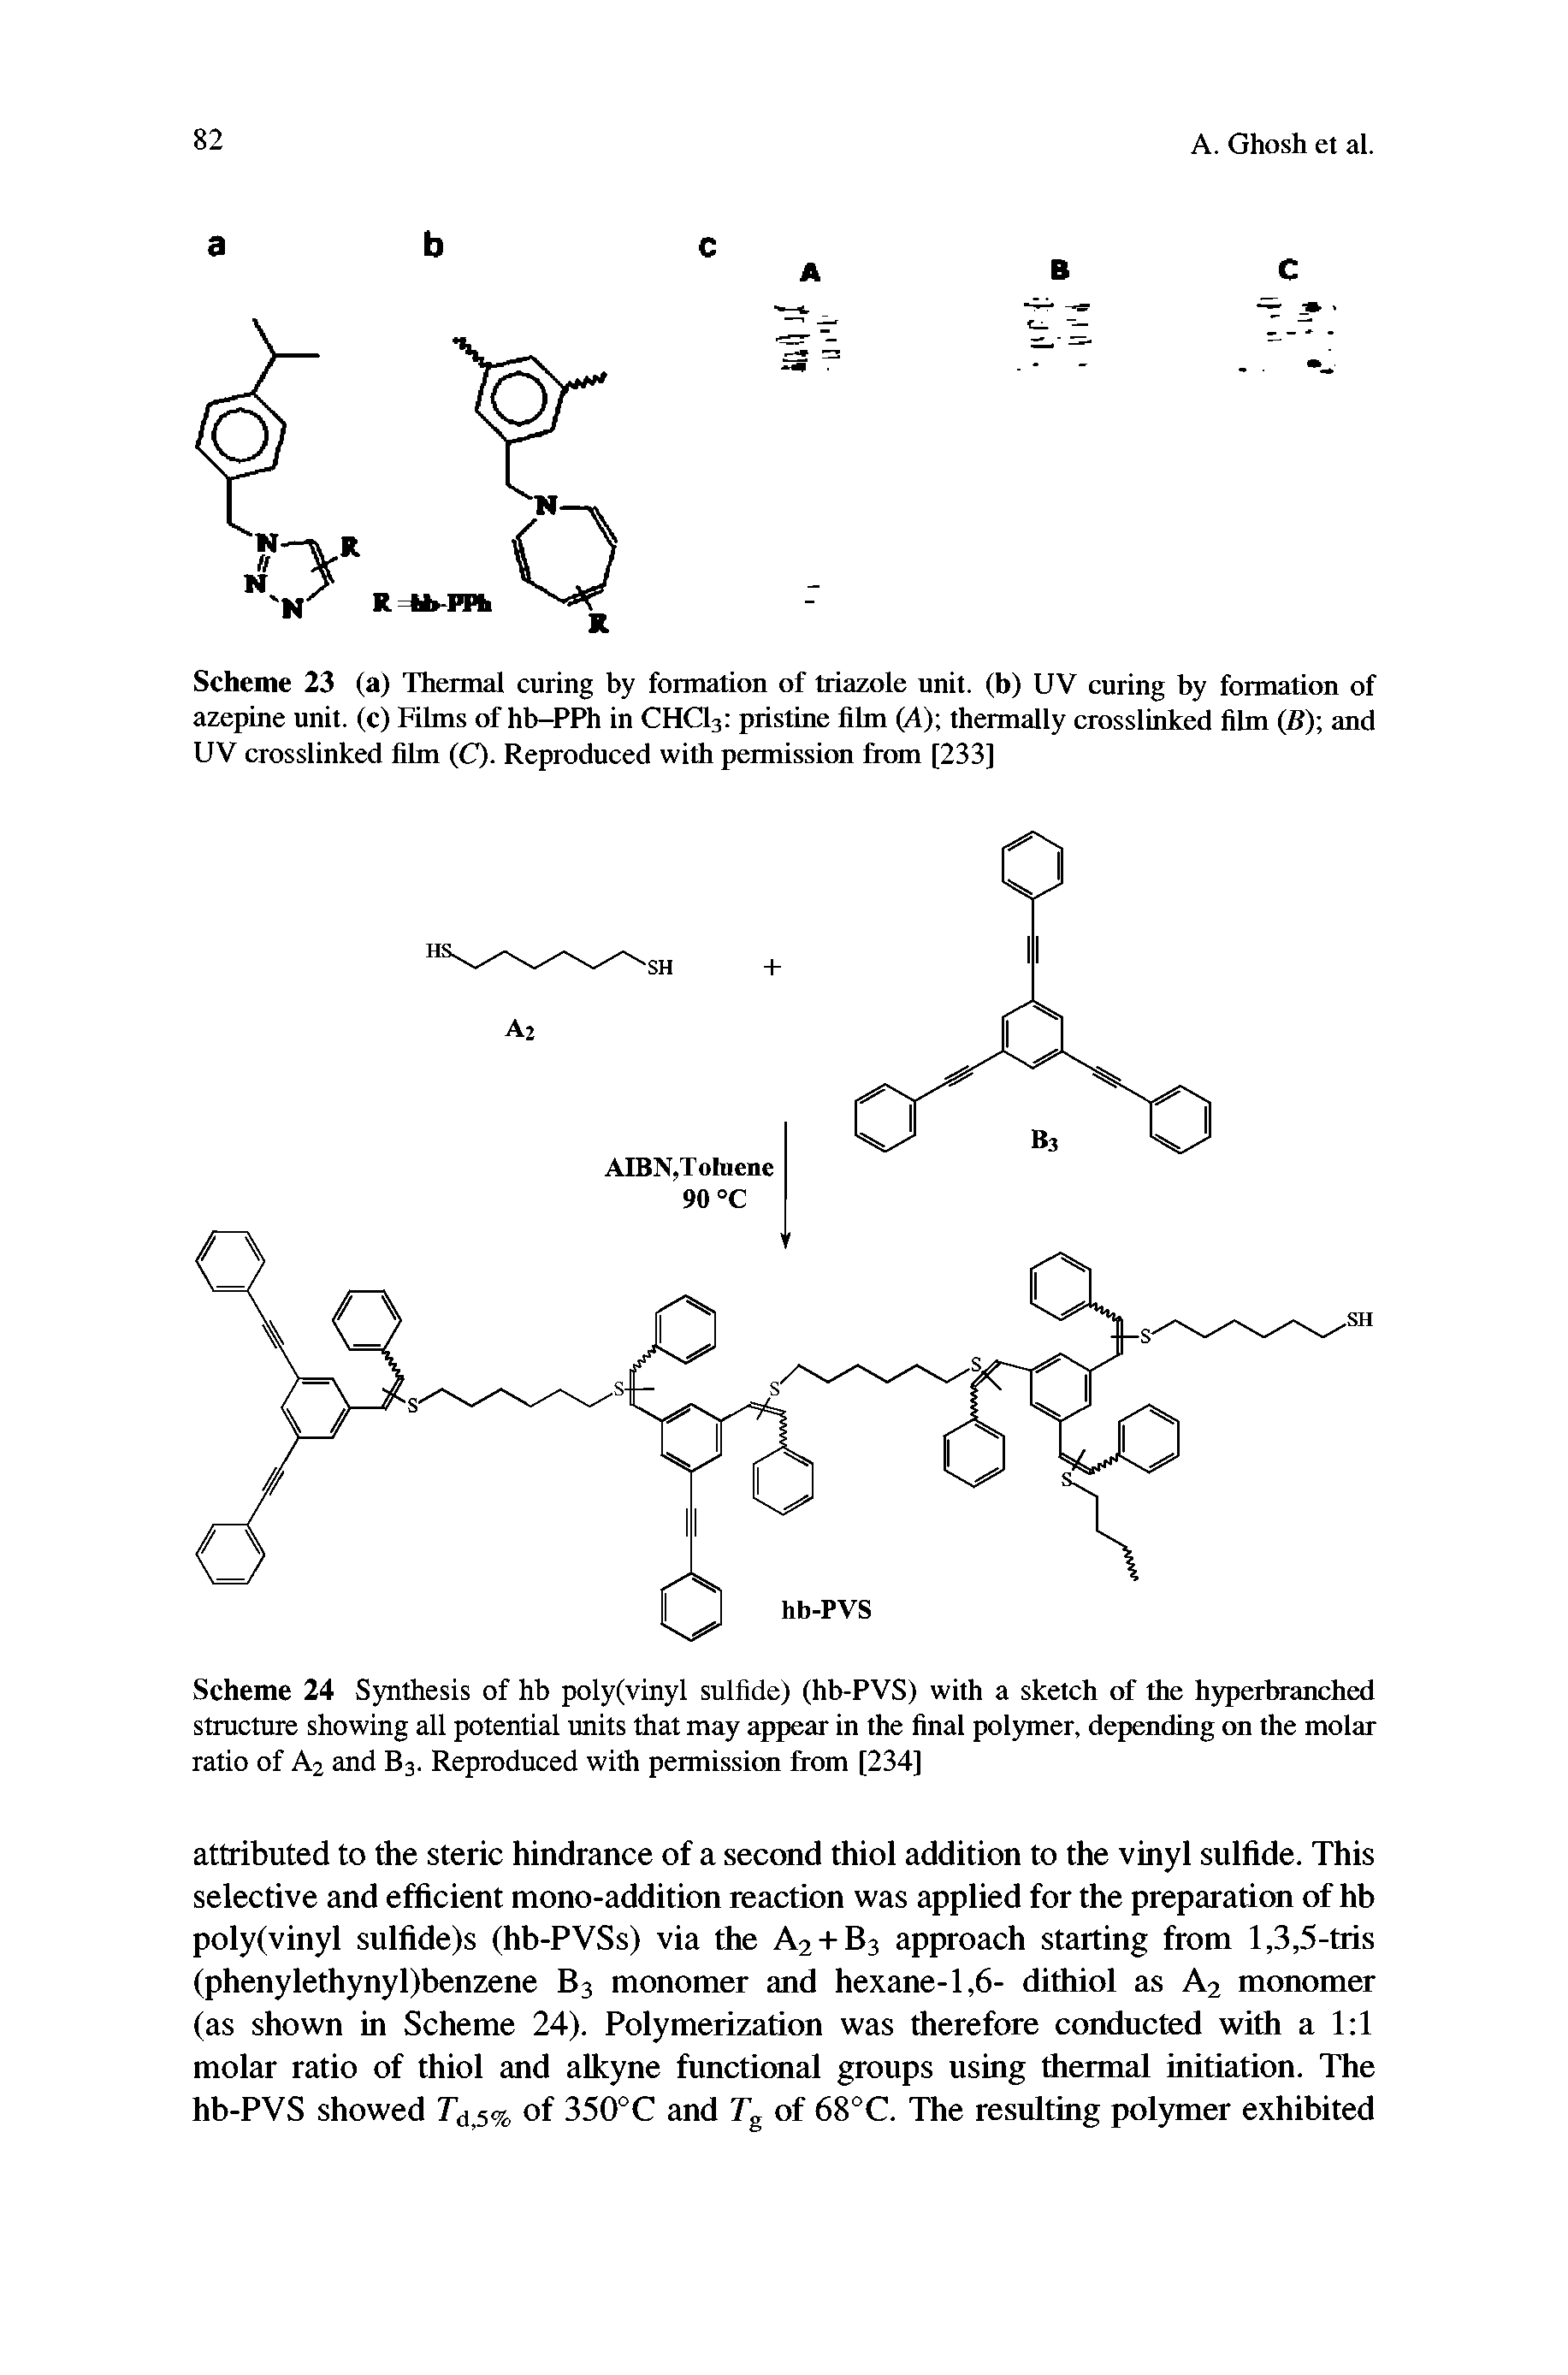 Scheme 24 Synthesis of hb poly(vinyl sulfide) (hb-PVS) with a sketch of the hyperbranched structure showing all potential units that may appear in the final polymer, depending on the molar ratio of A2 and B3. Reproduced with permission from [234]...